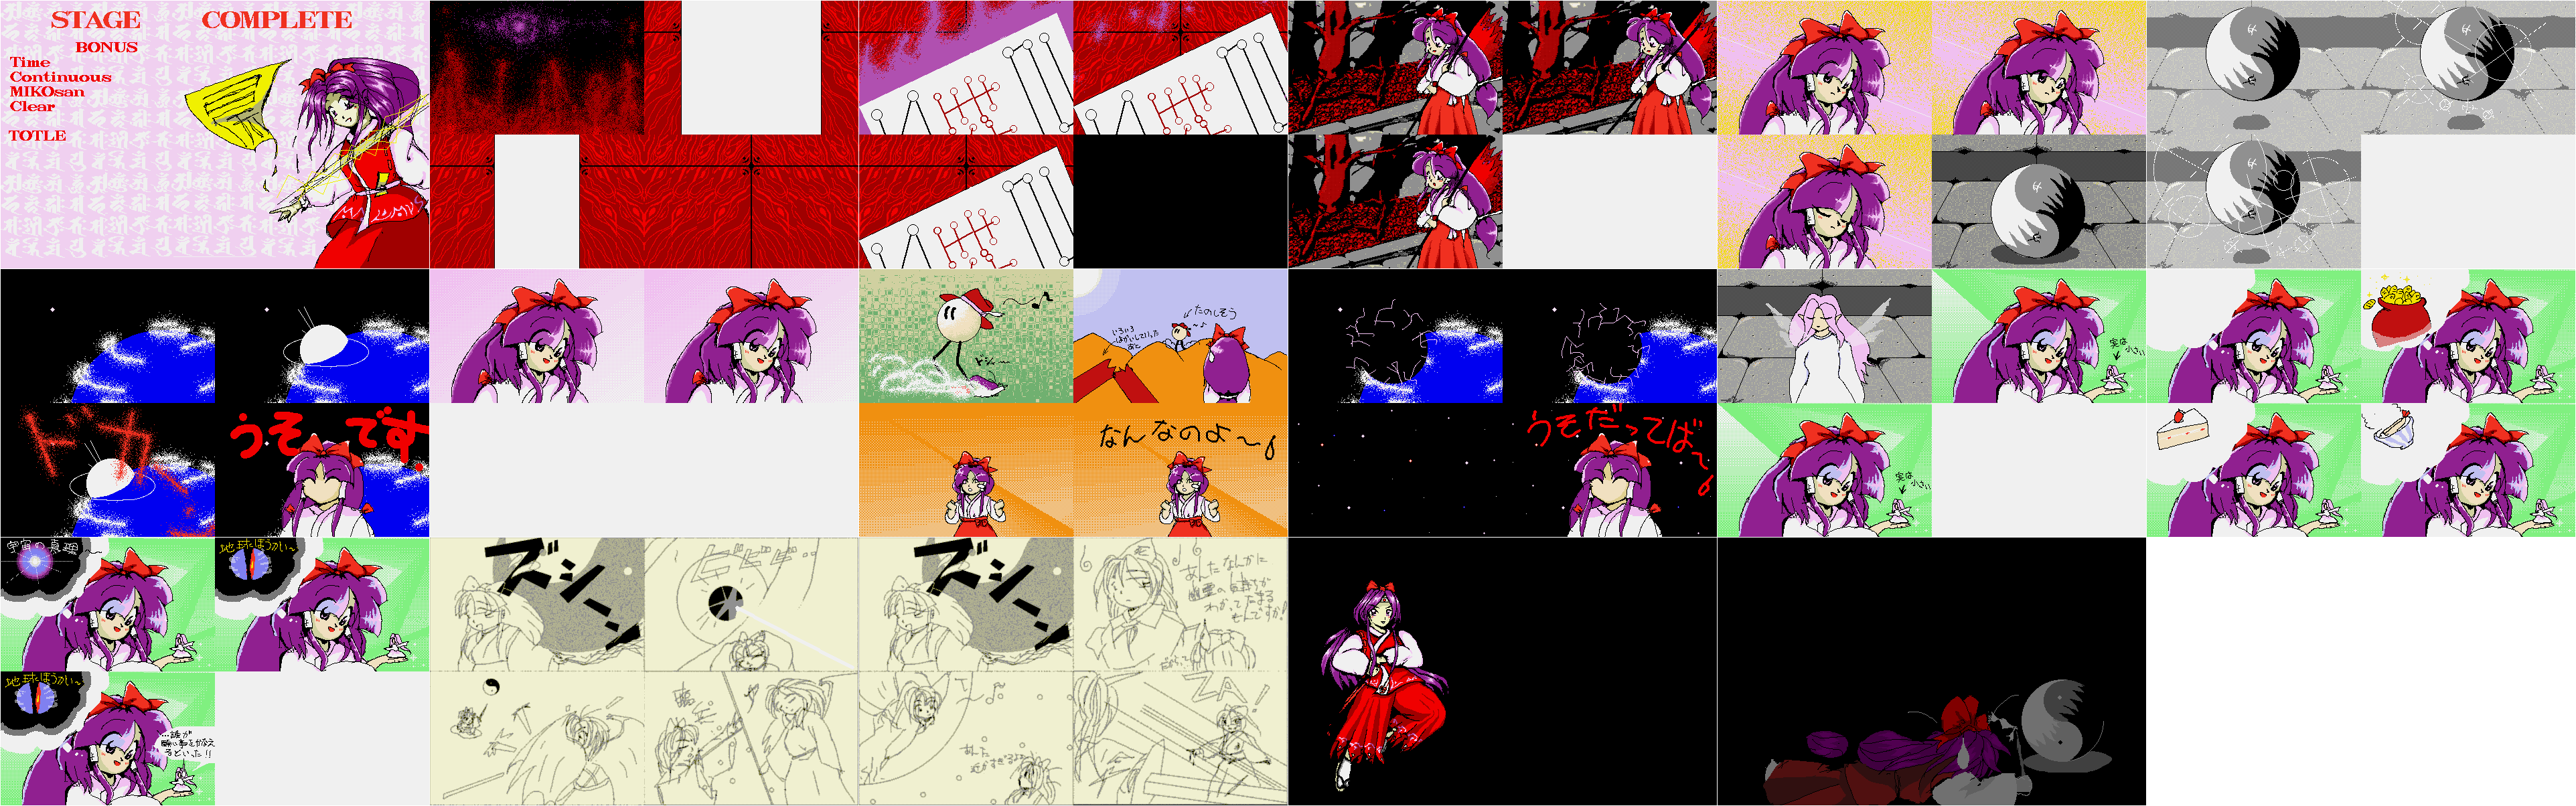 Touhou Reiiden (the Highly Responsive to Prayers) - Ending Screens